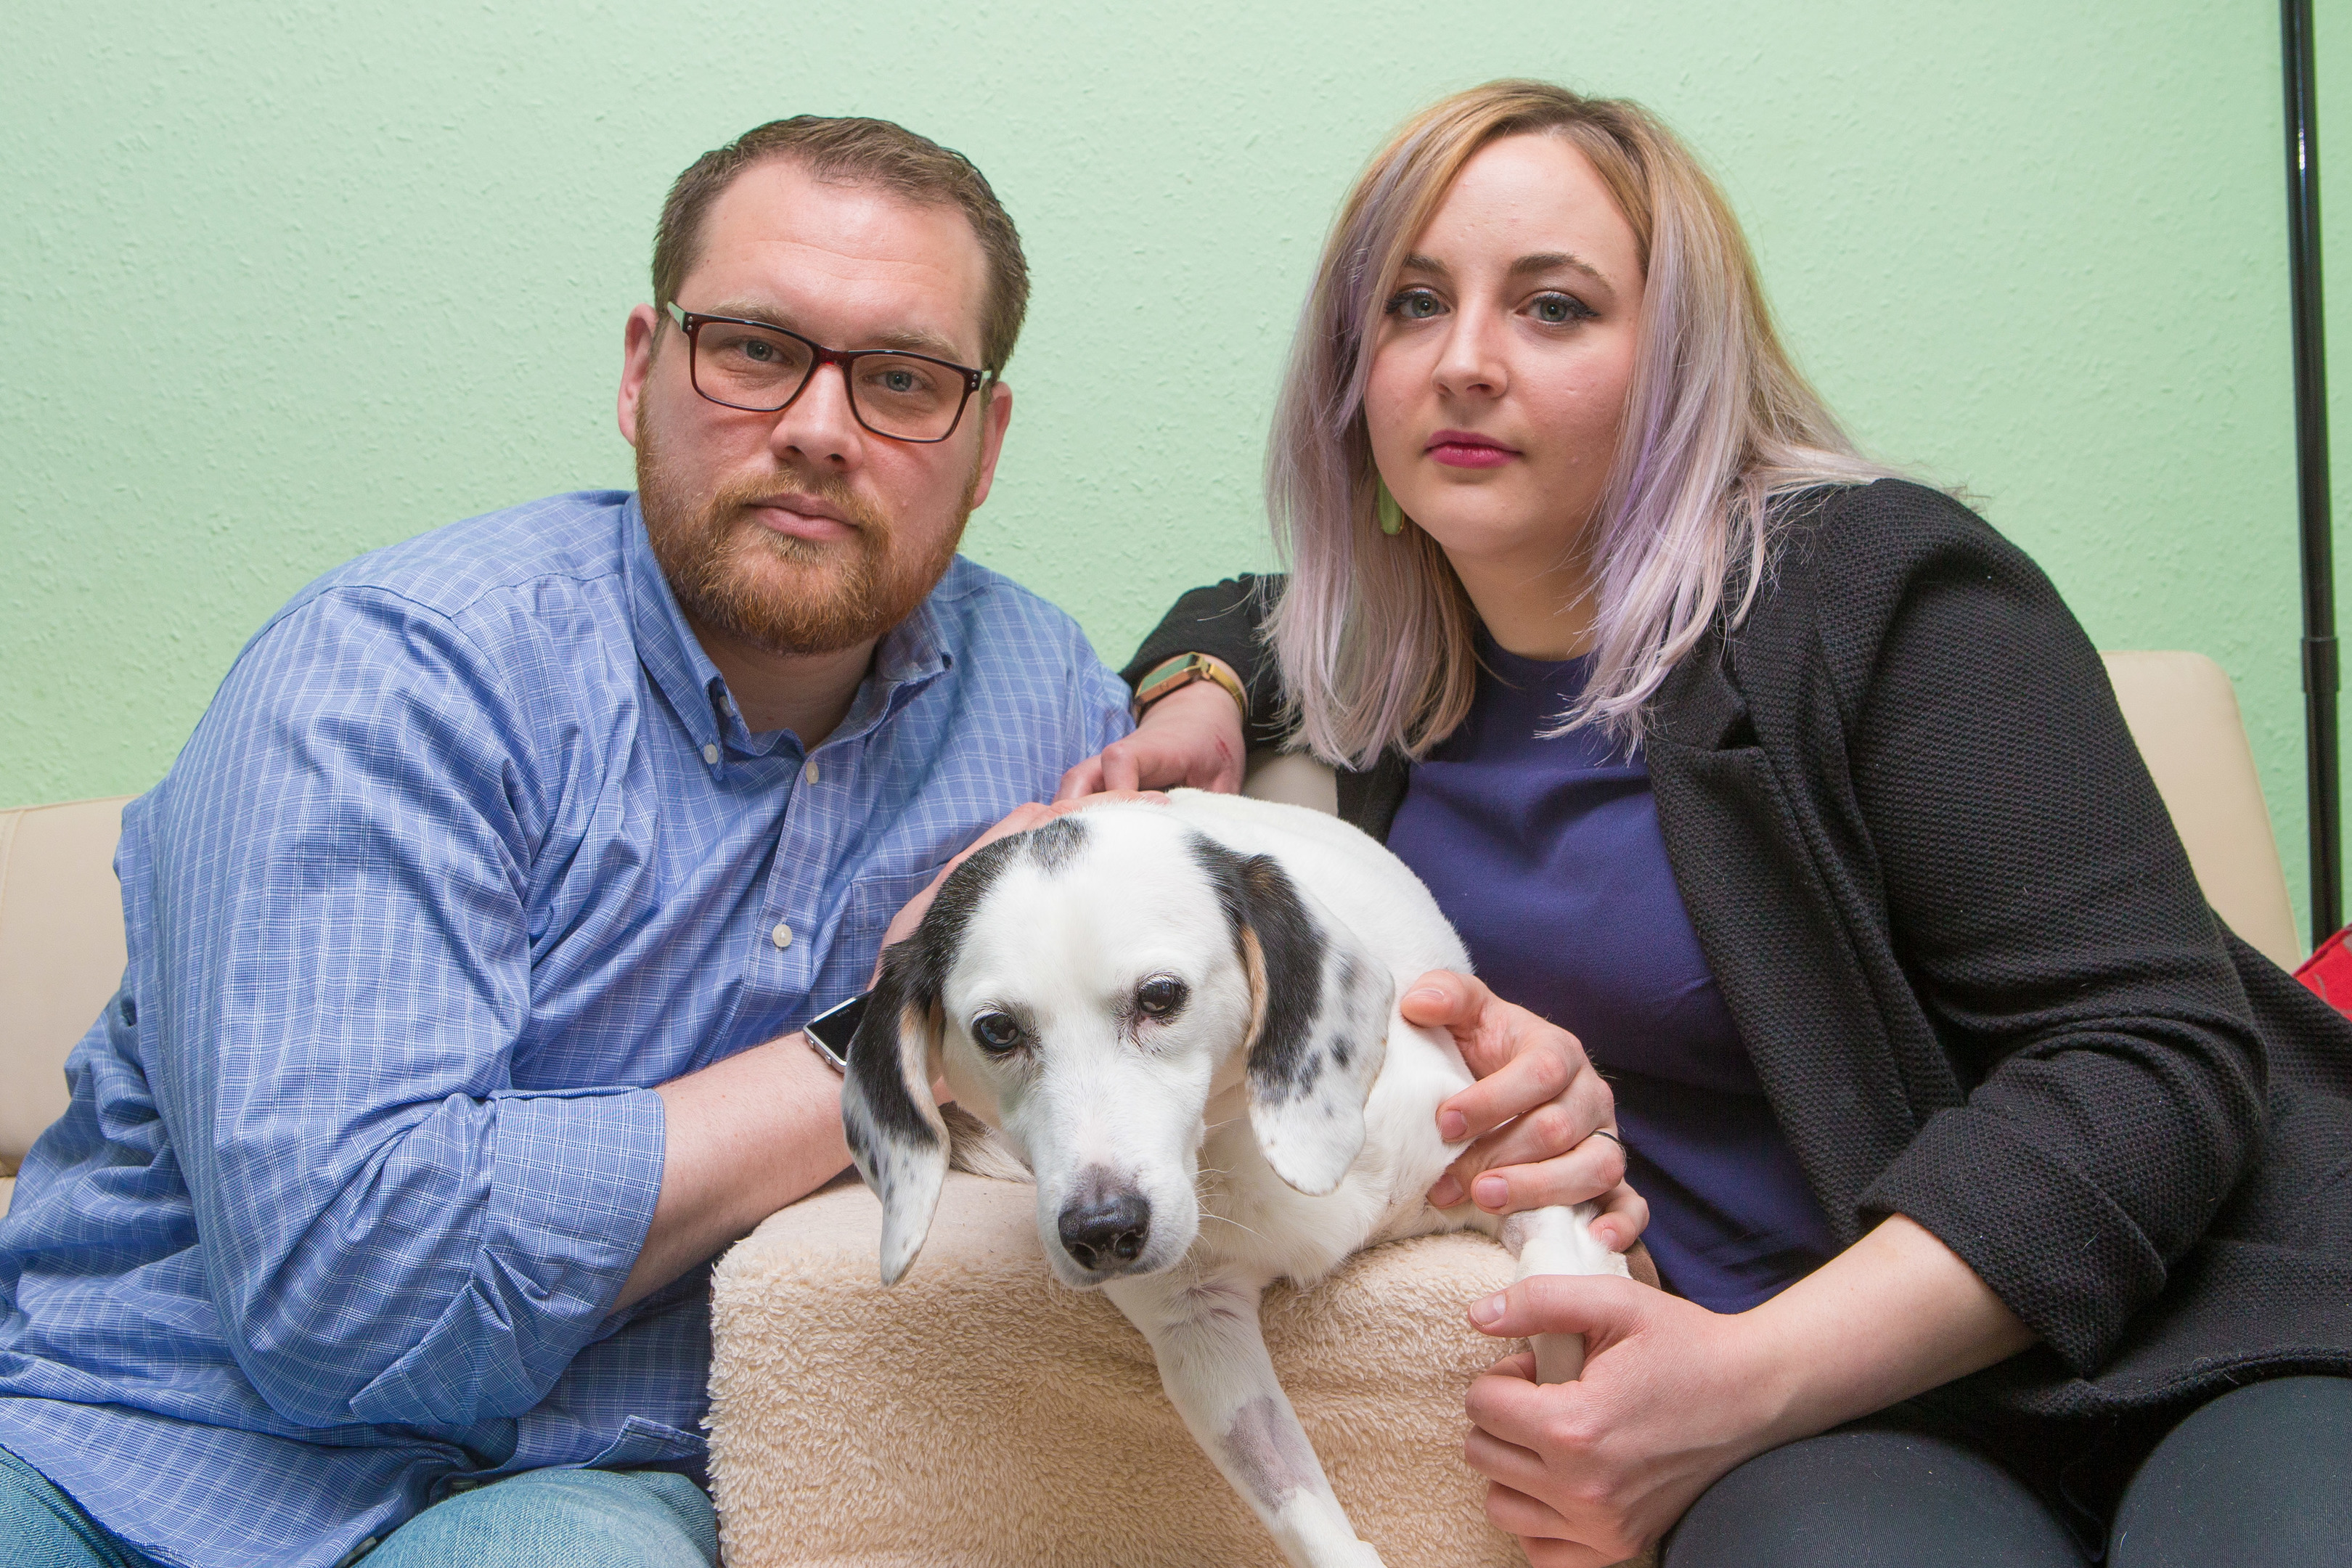 Diggery the service dog with his owners Kevin Nordby and wife Stephanie.